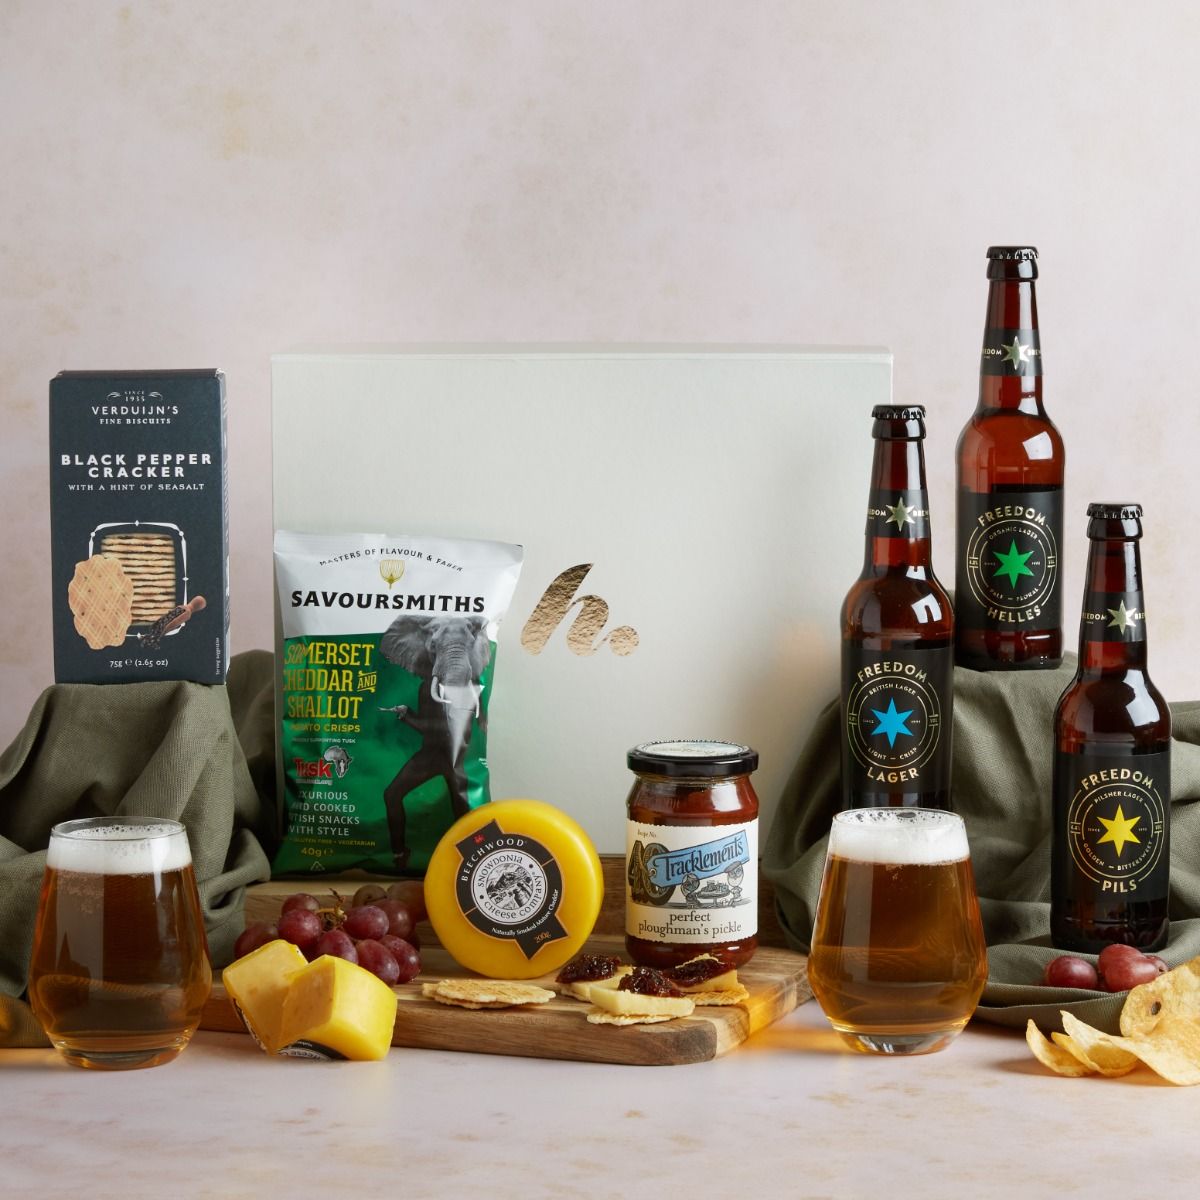 A beer and cheese hamper